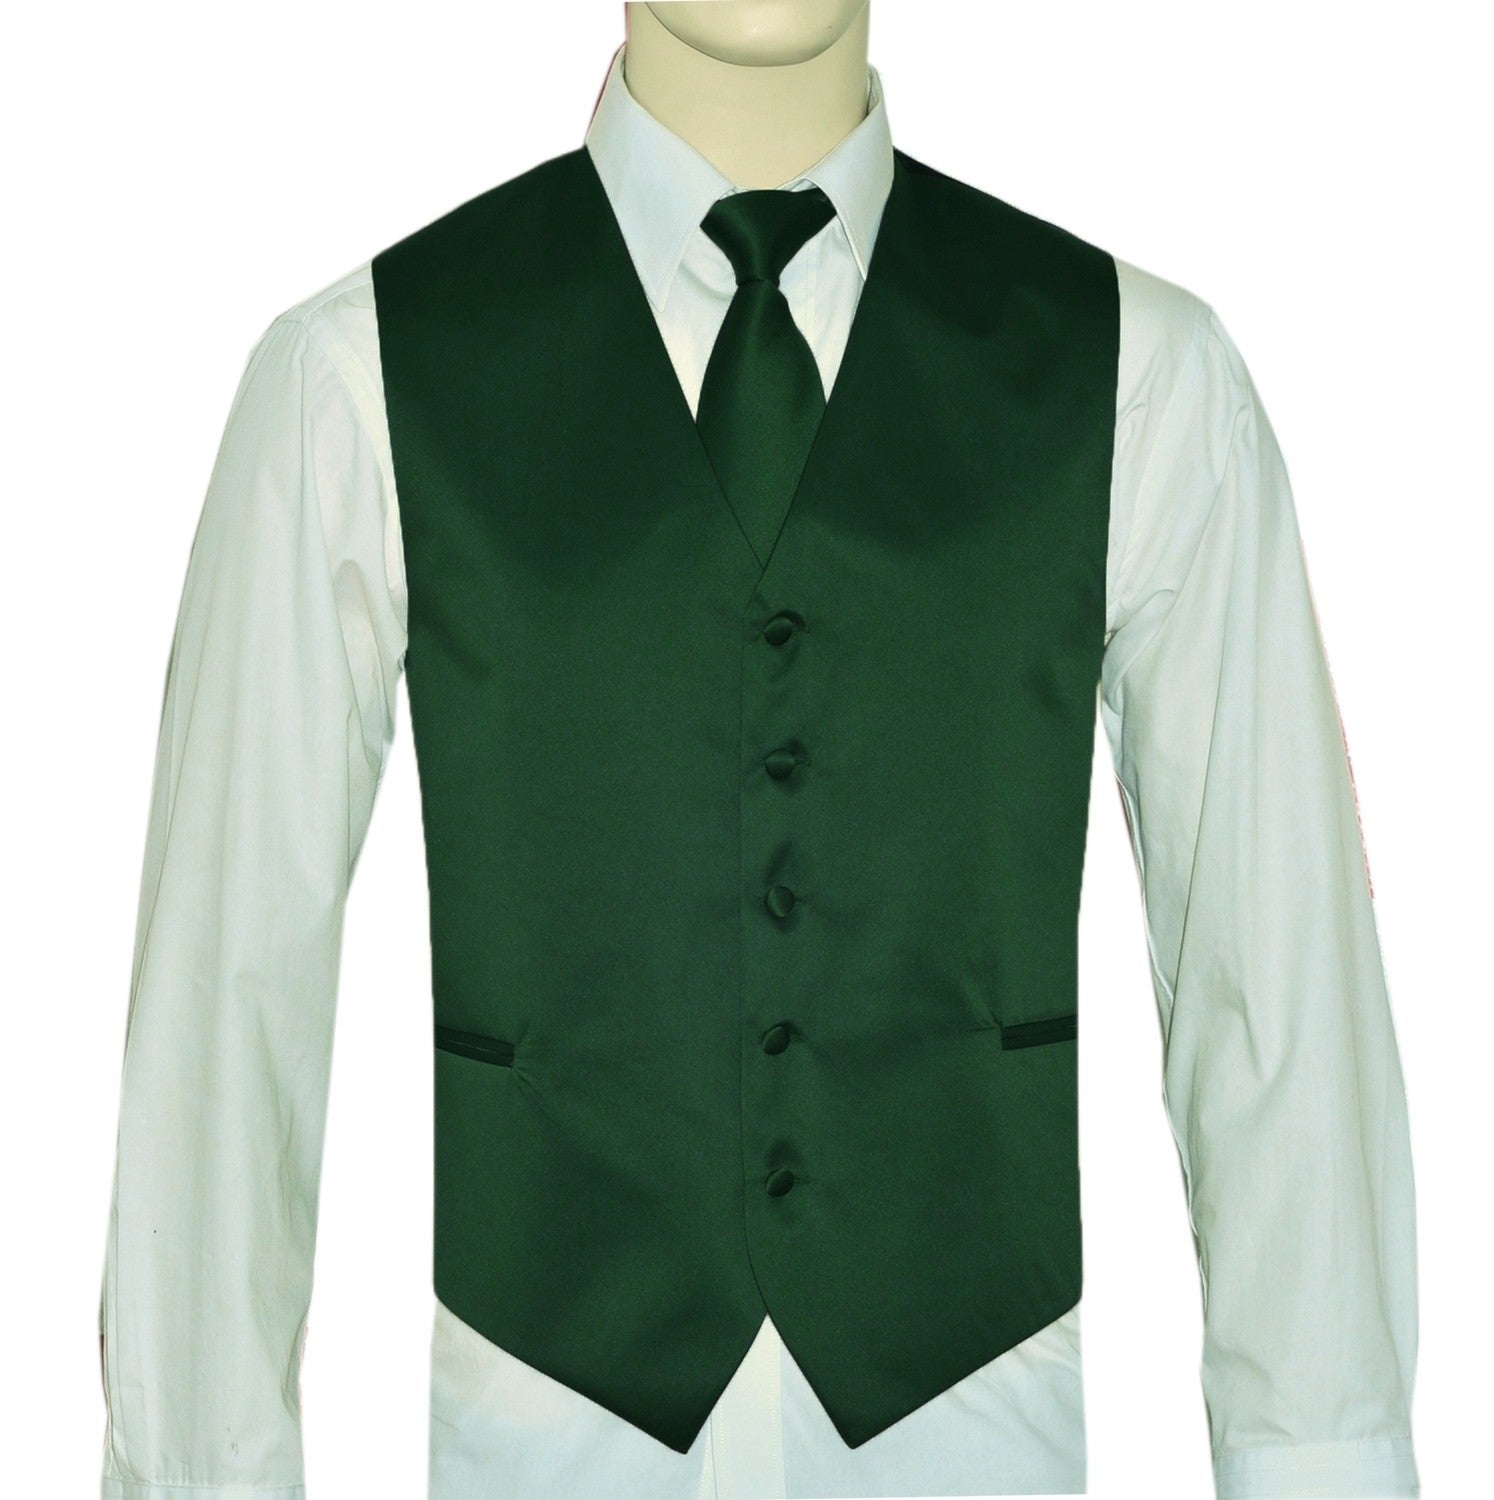 Vest Green and Tie Forest Set